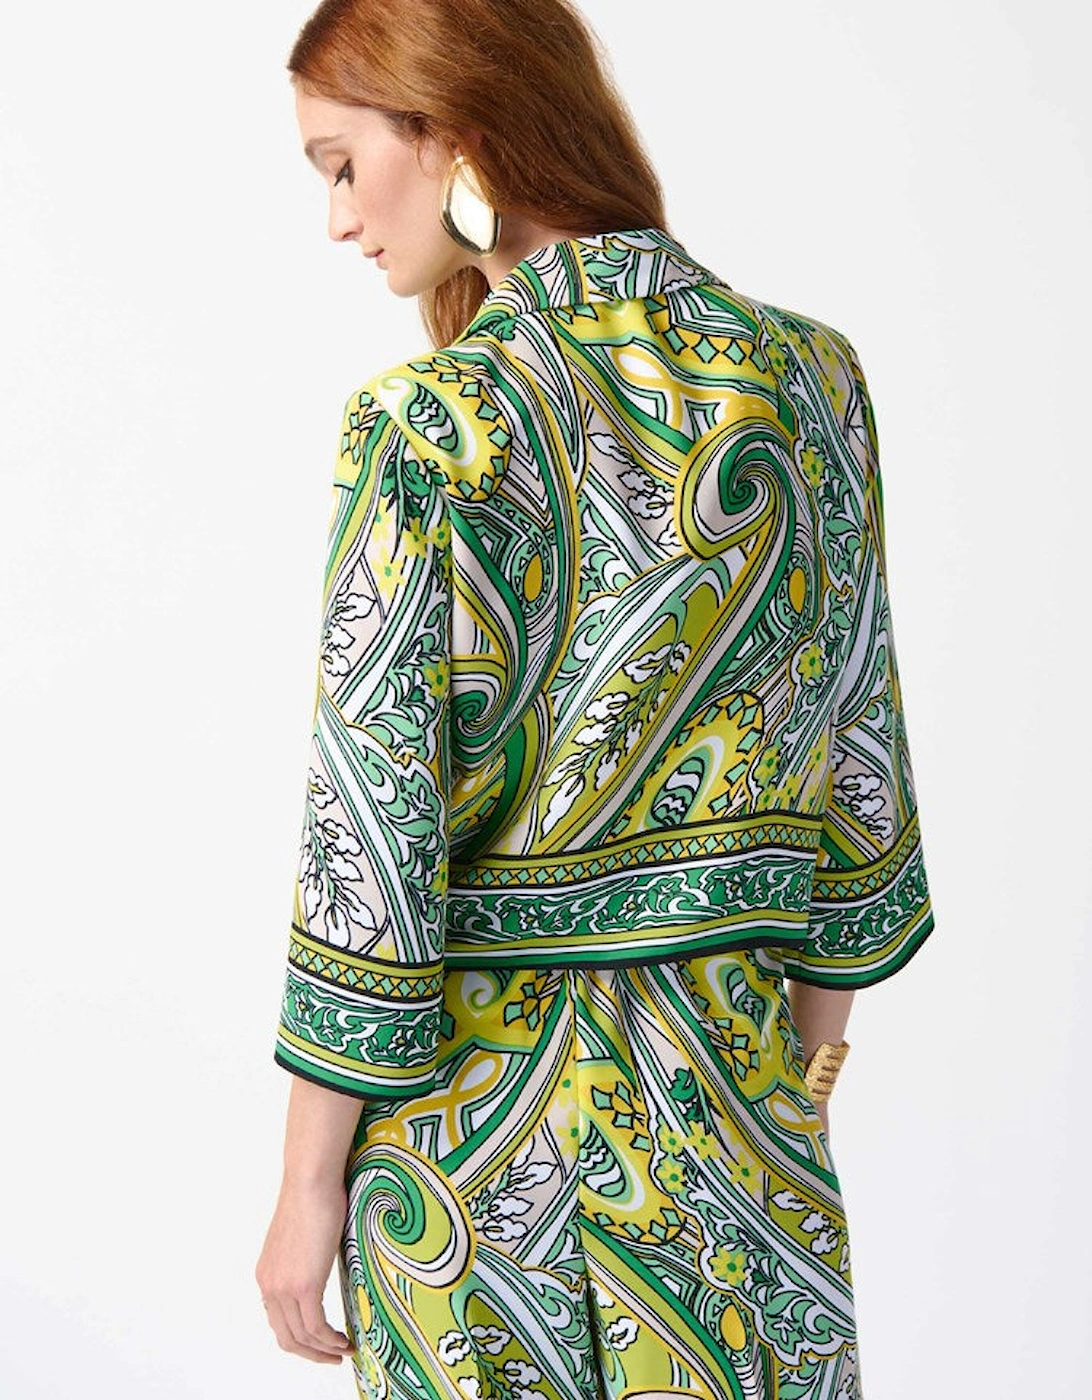 Woven paisley print tie front top